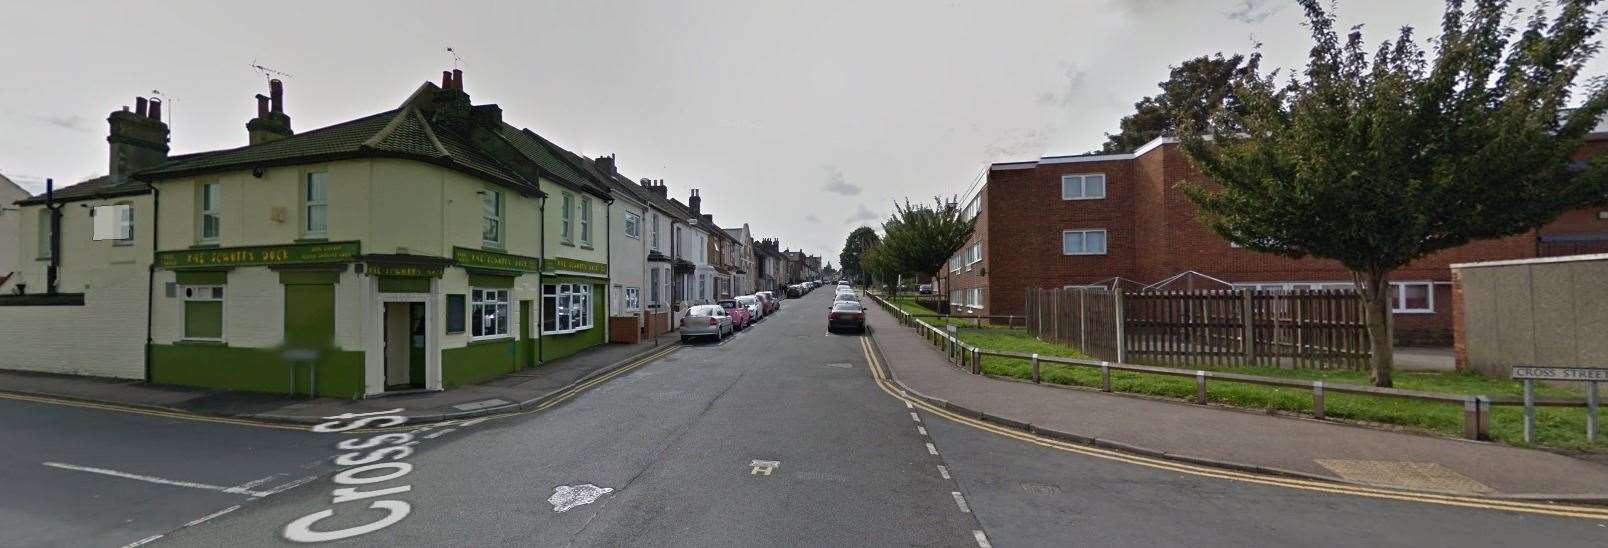 The man who was stabbed in Skinner Street, Gillingham is in hospital (13762365)